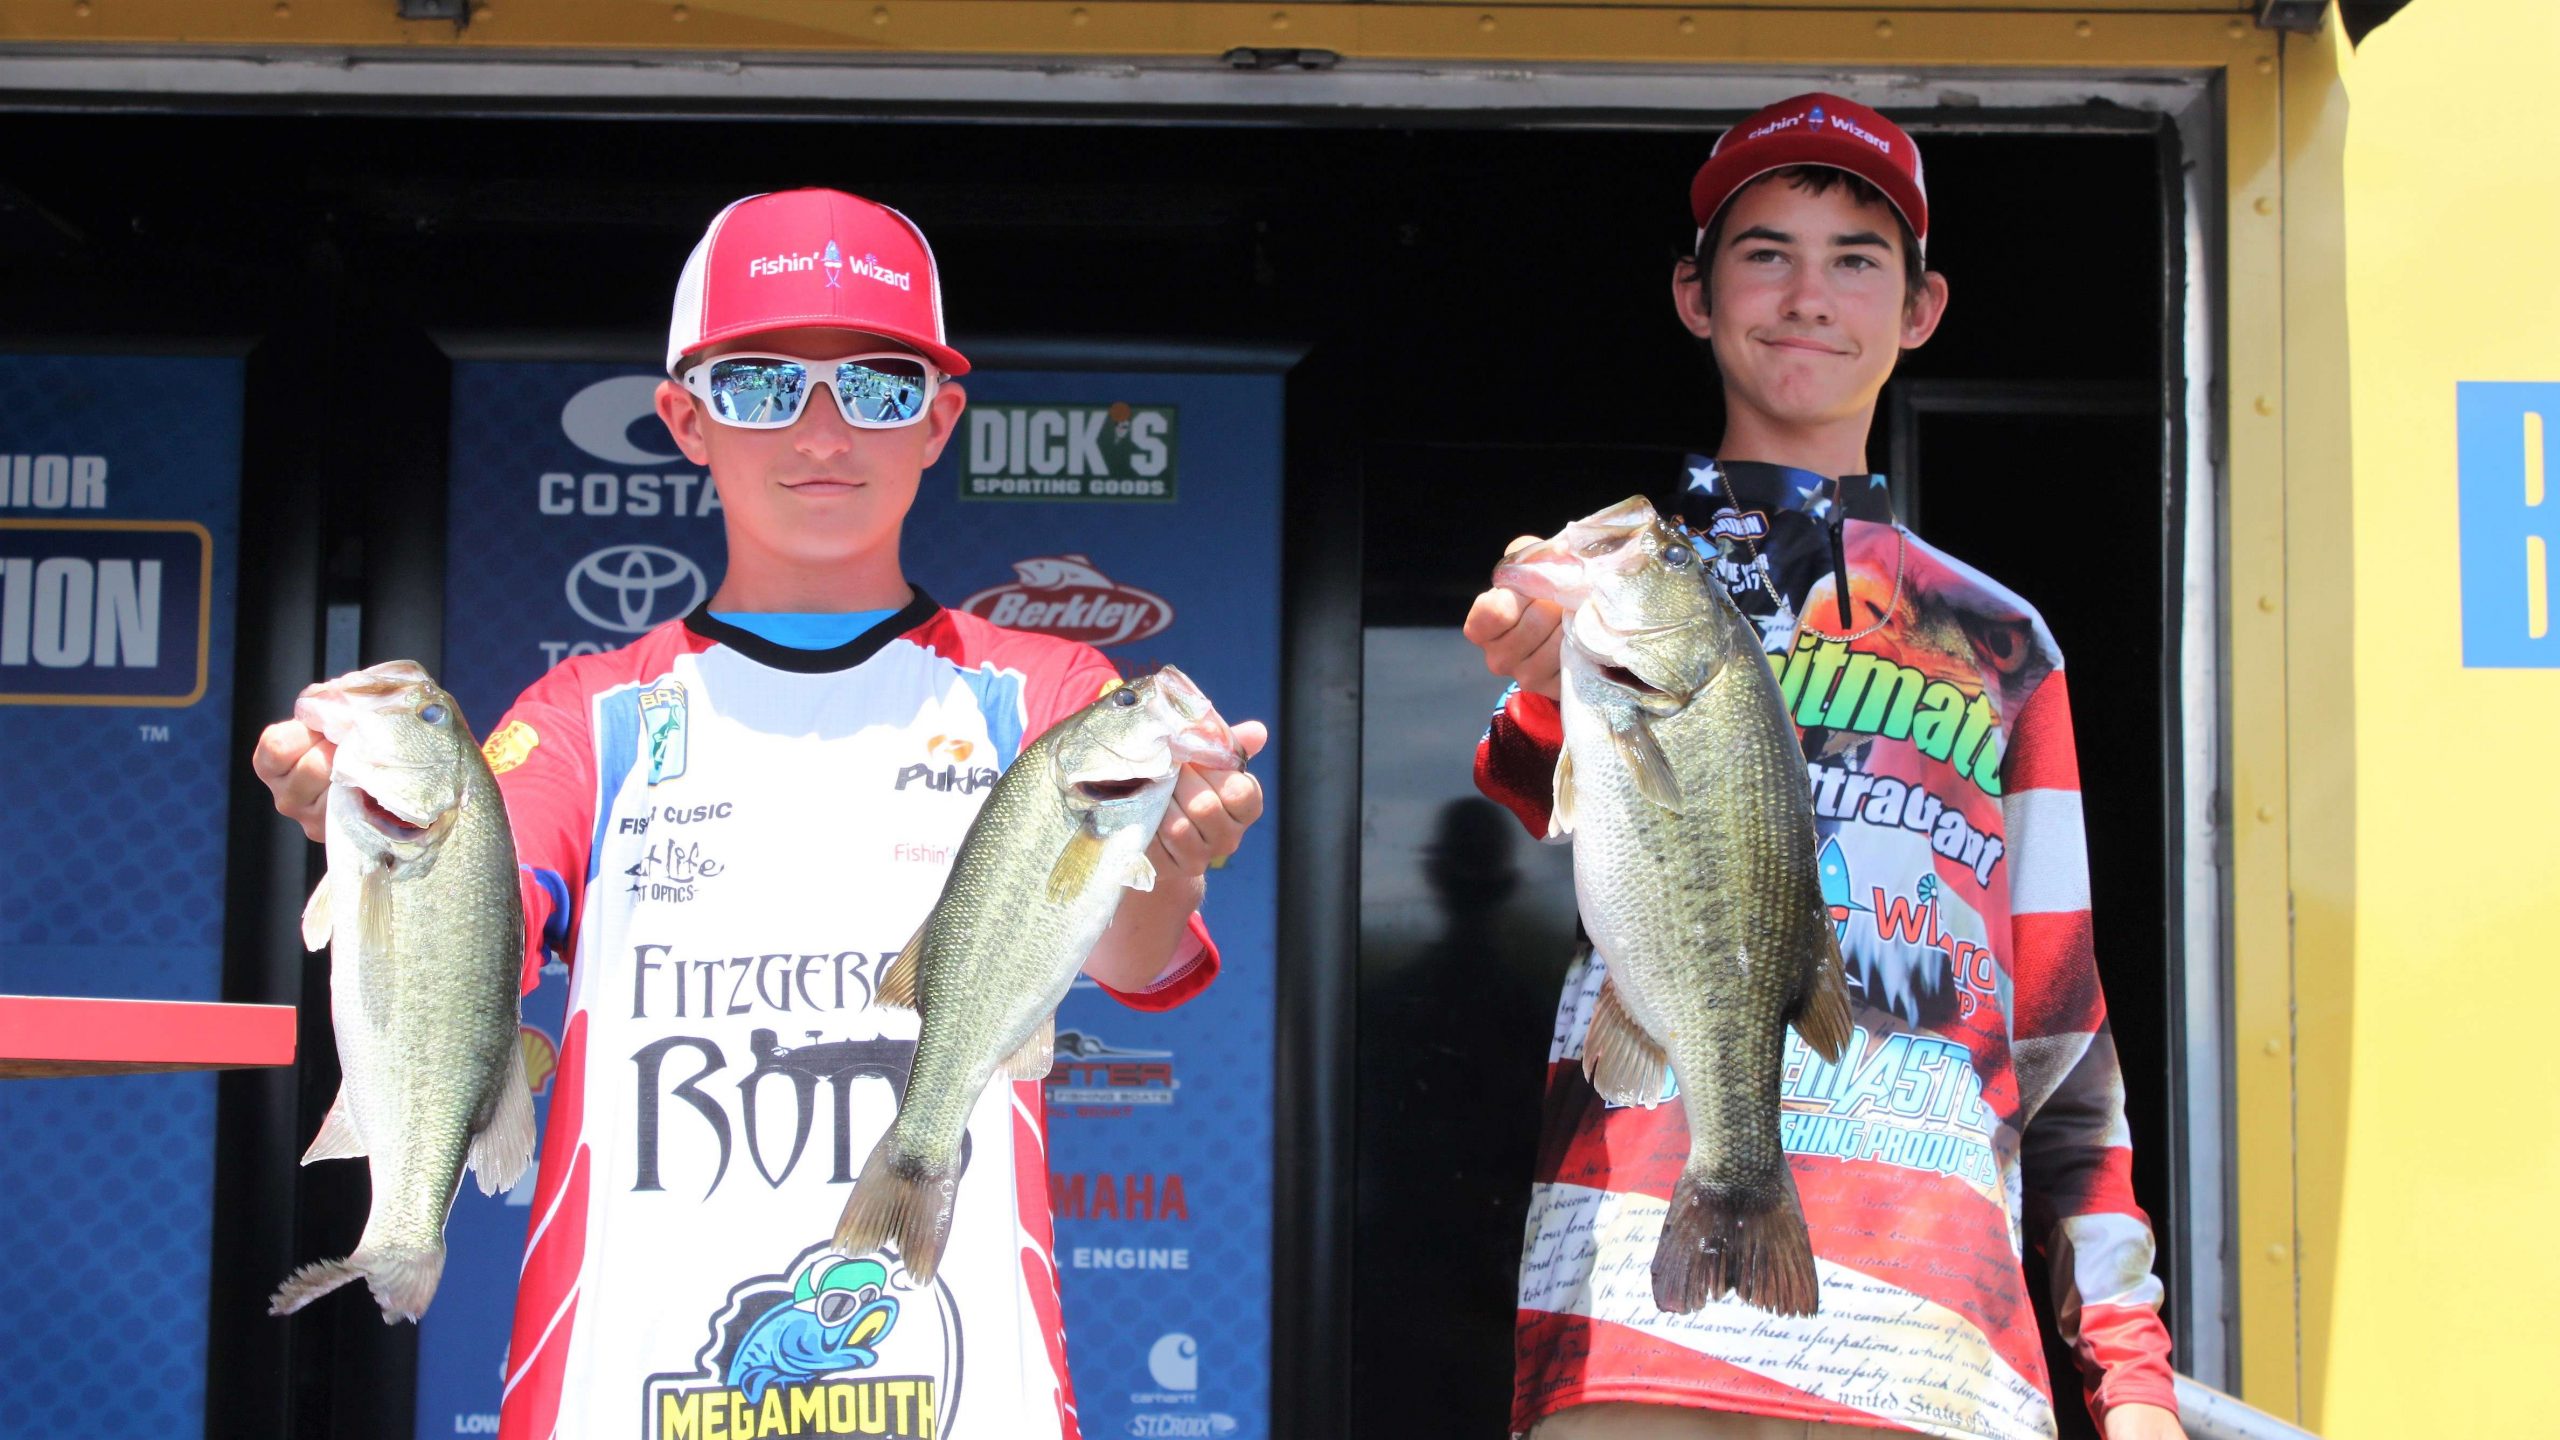 Fisher Cusic and Sammy Jay Acree of Florida are in fifth place with 9-12.
